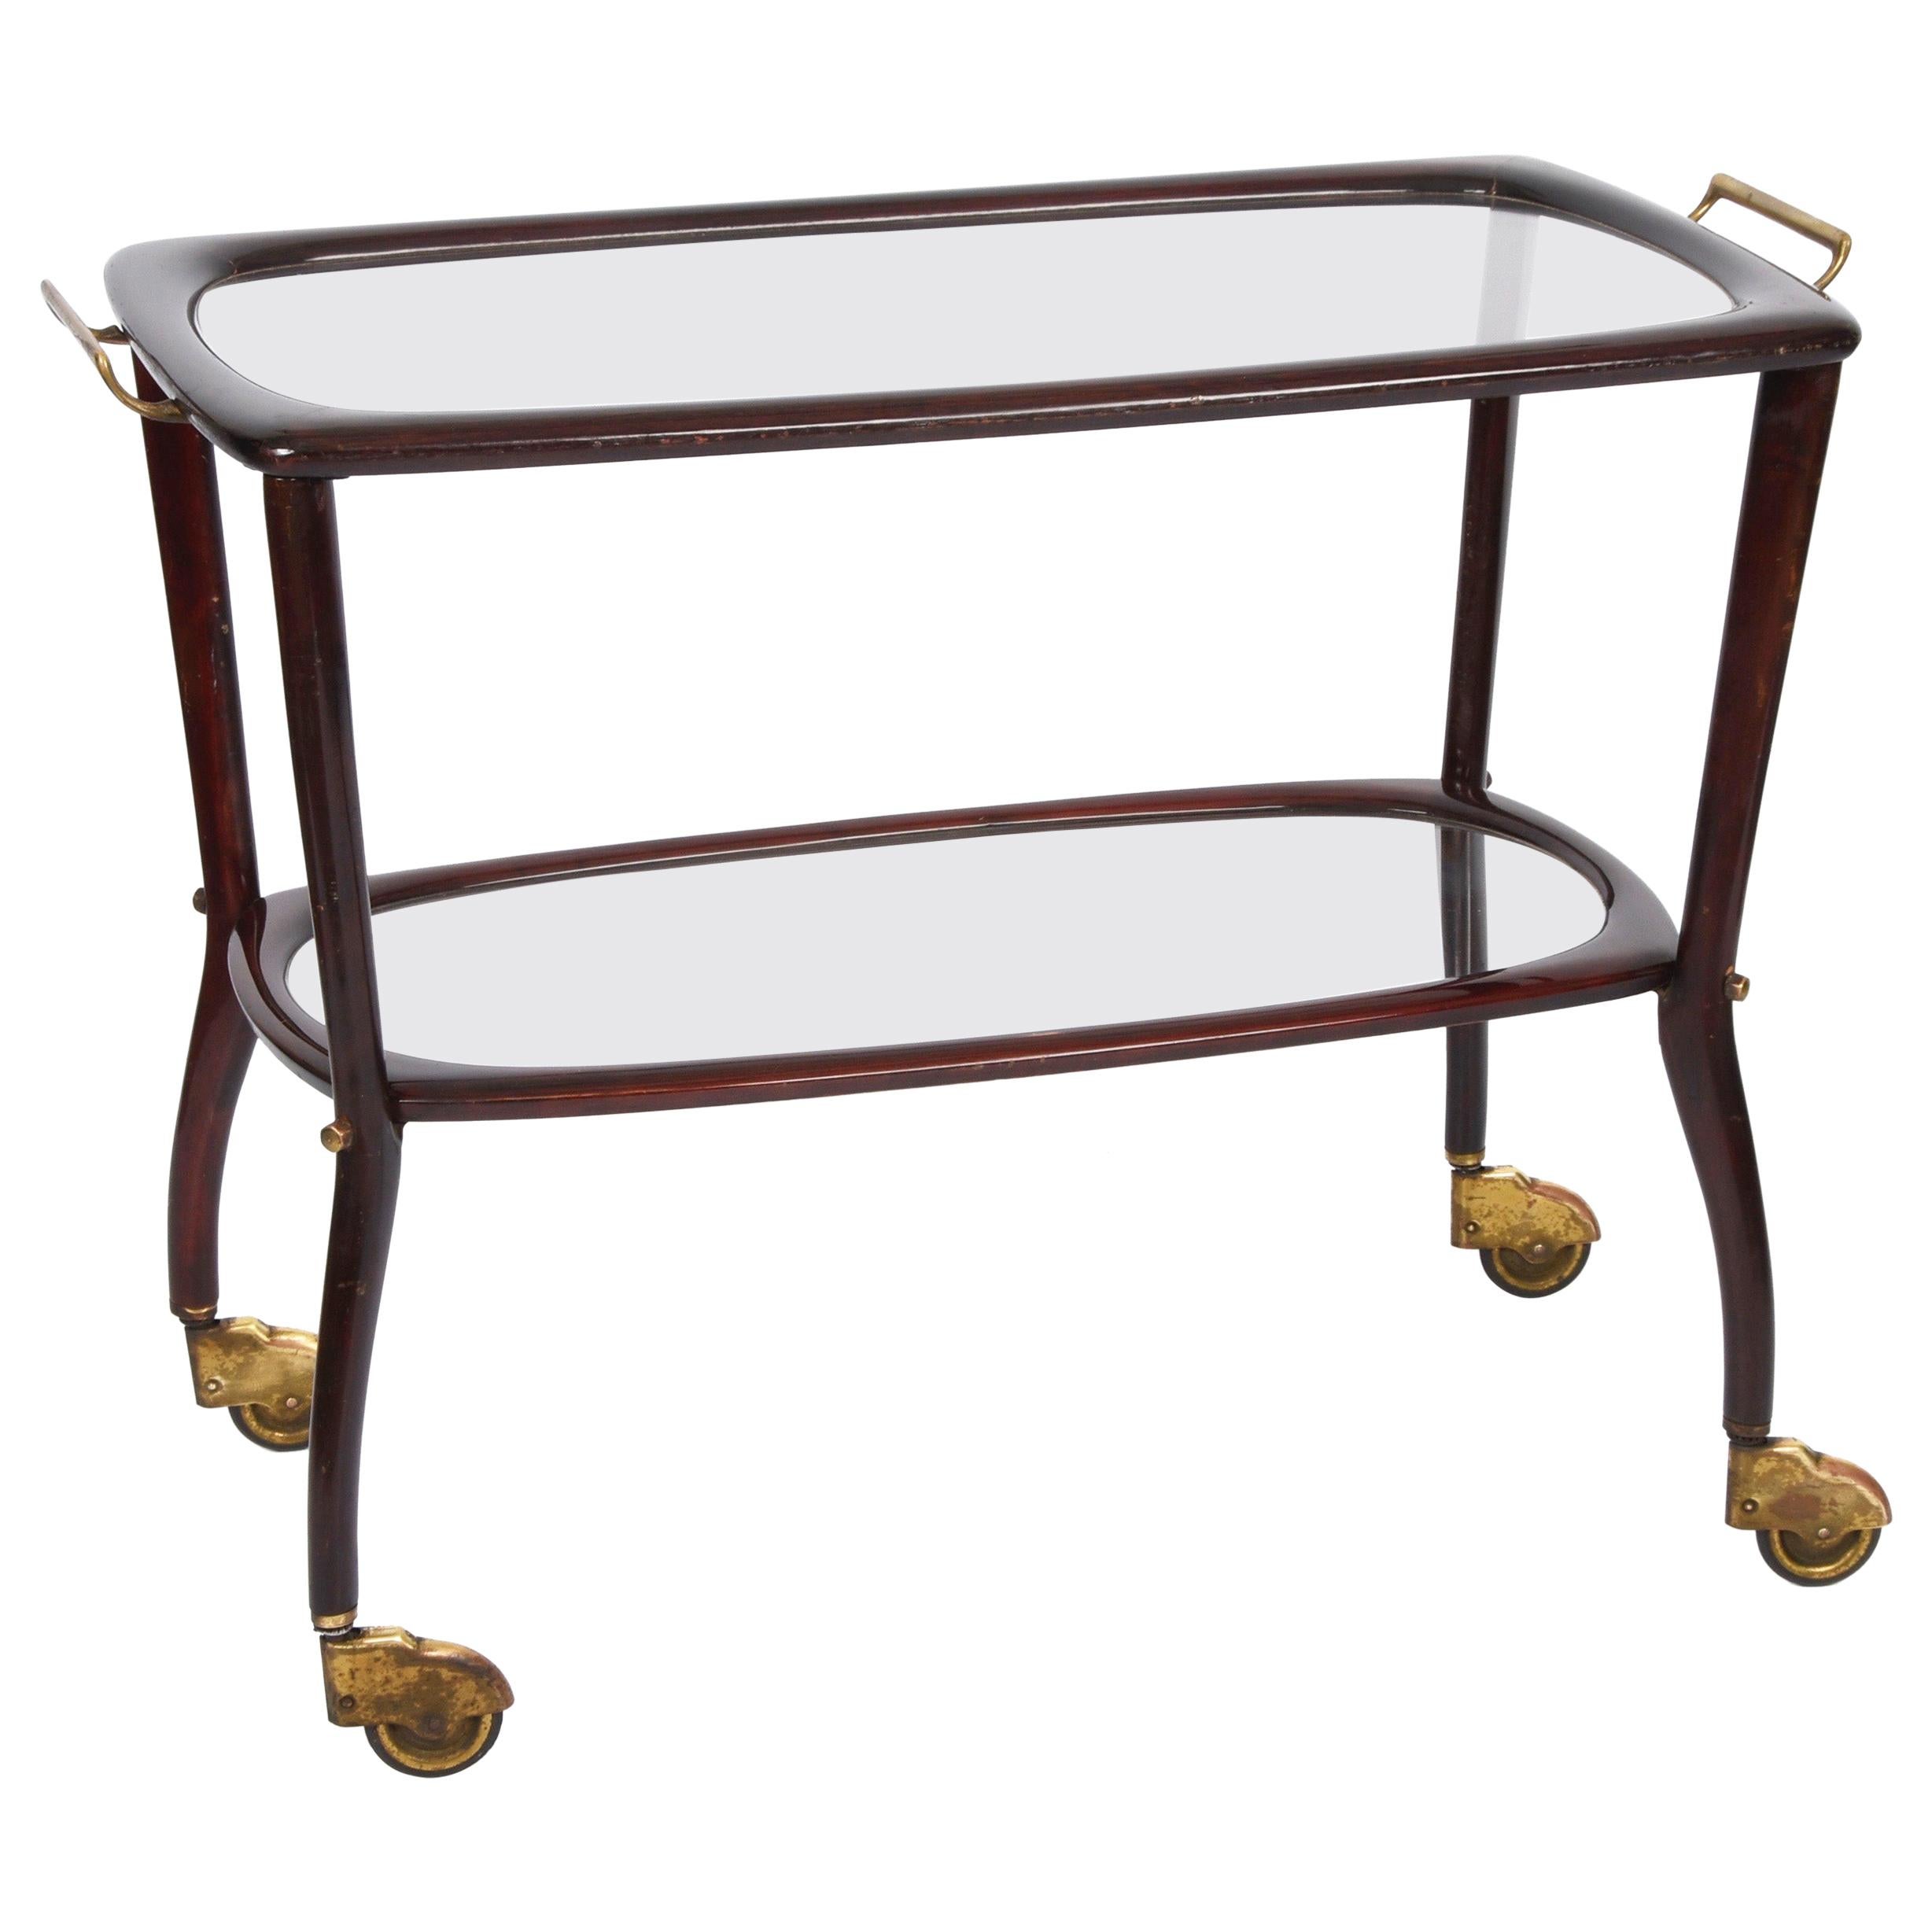 Midcentury Cesare Lacca Wood and Glass Italian Serving Trolley Bar Cart, 1950s